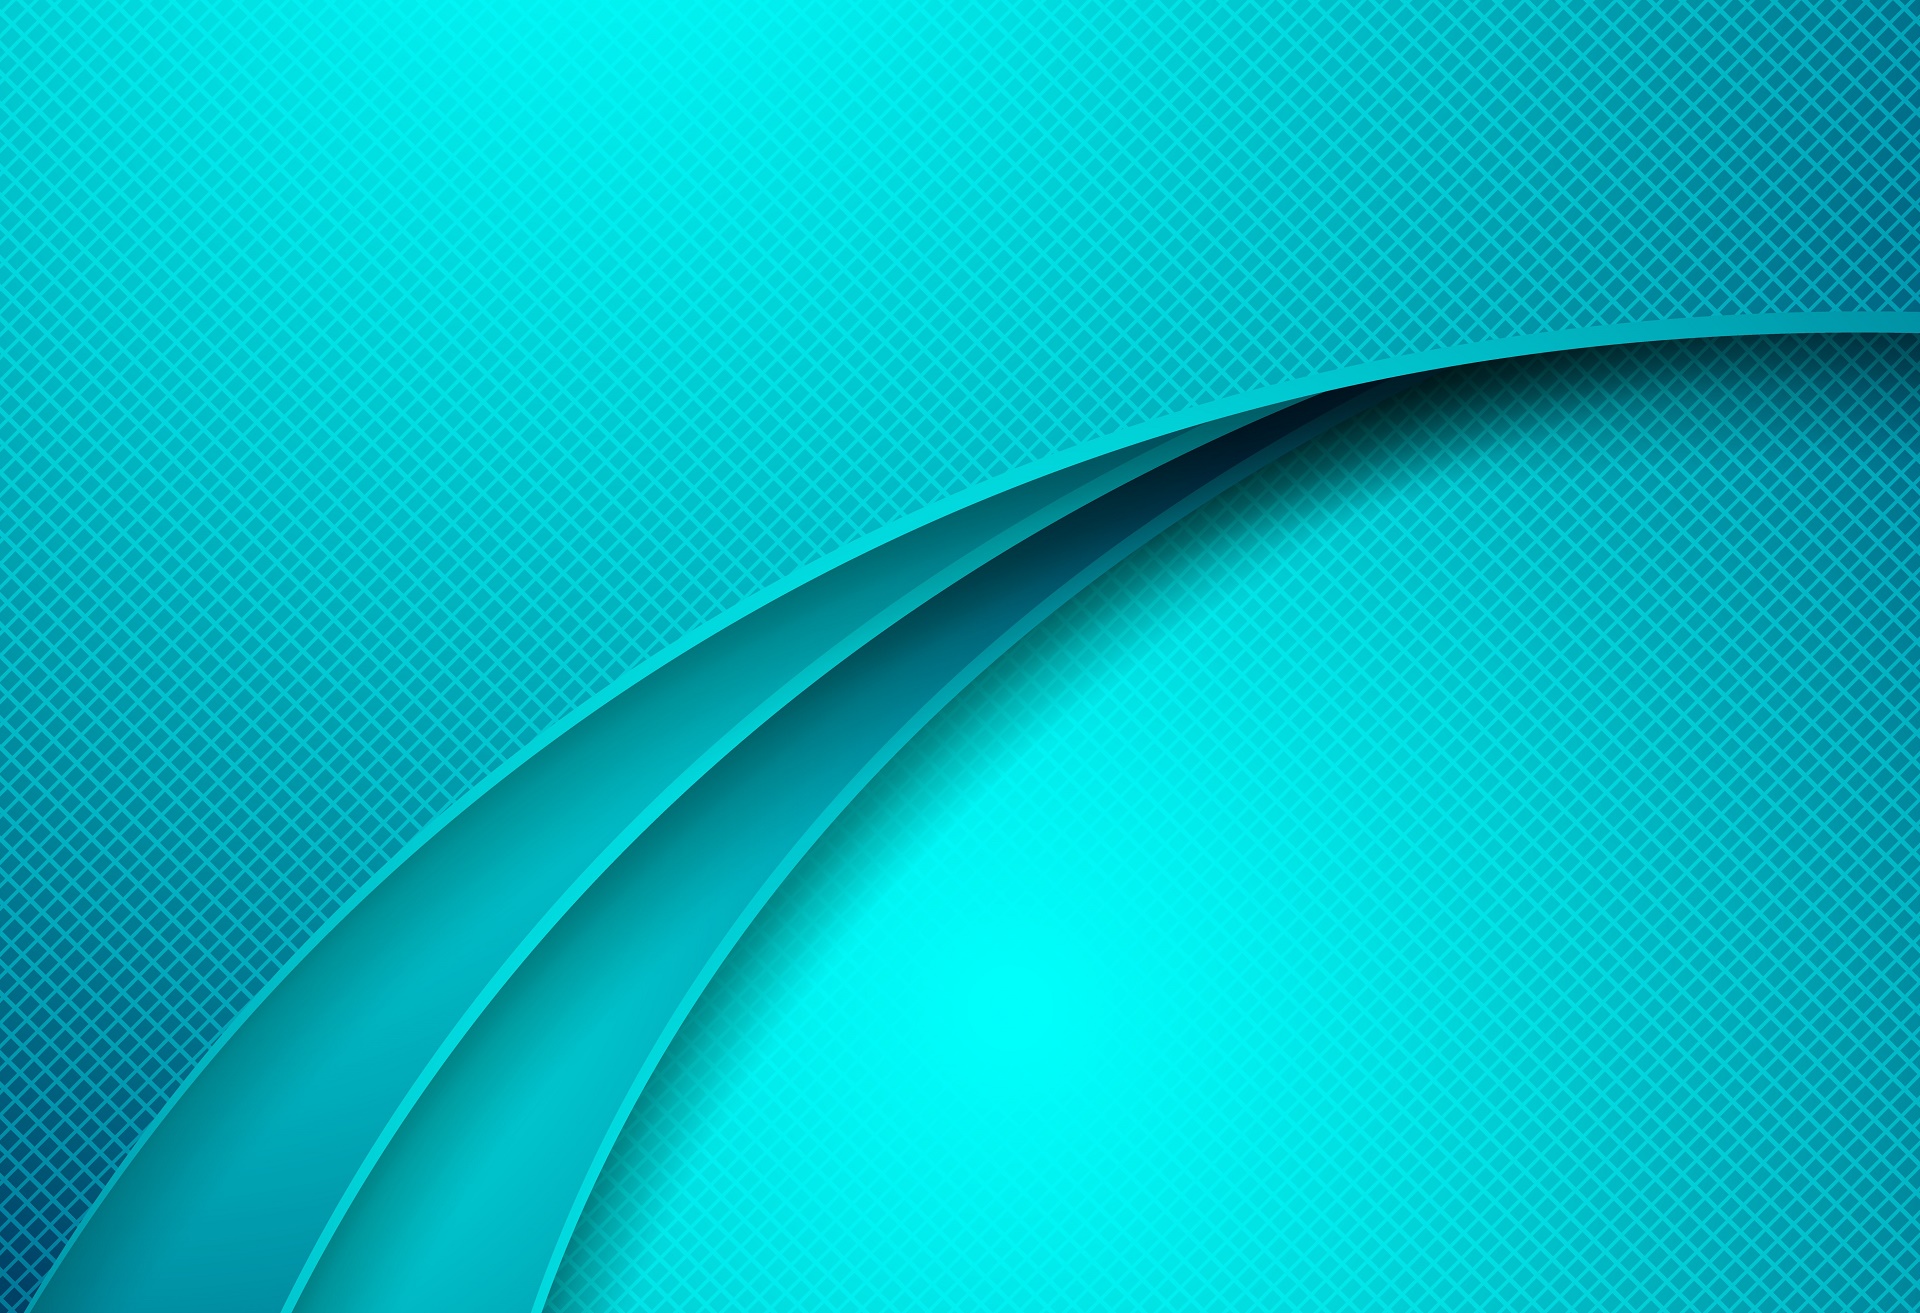 765472 free download Turquoise wallpapers for phone,  Turquoise images and screensavers for mobile